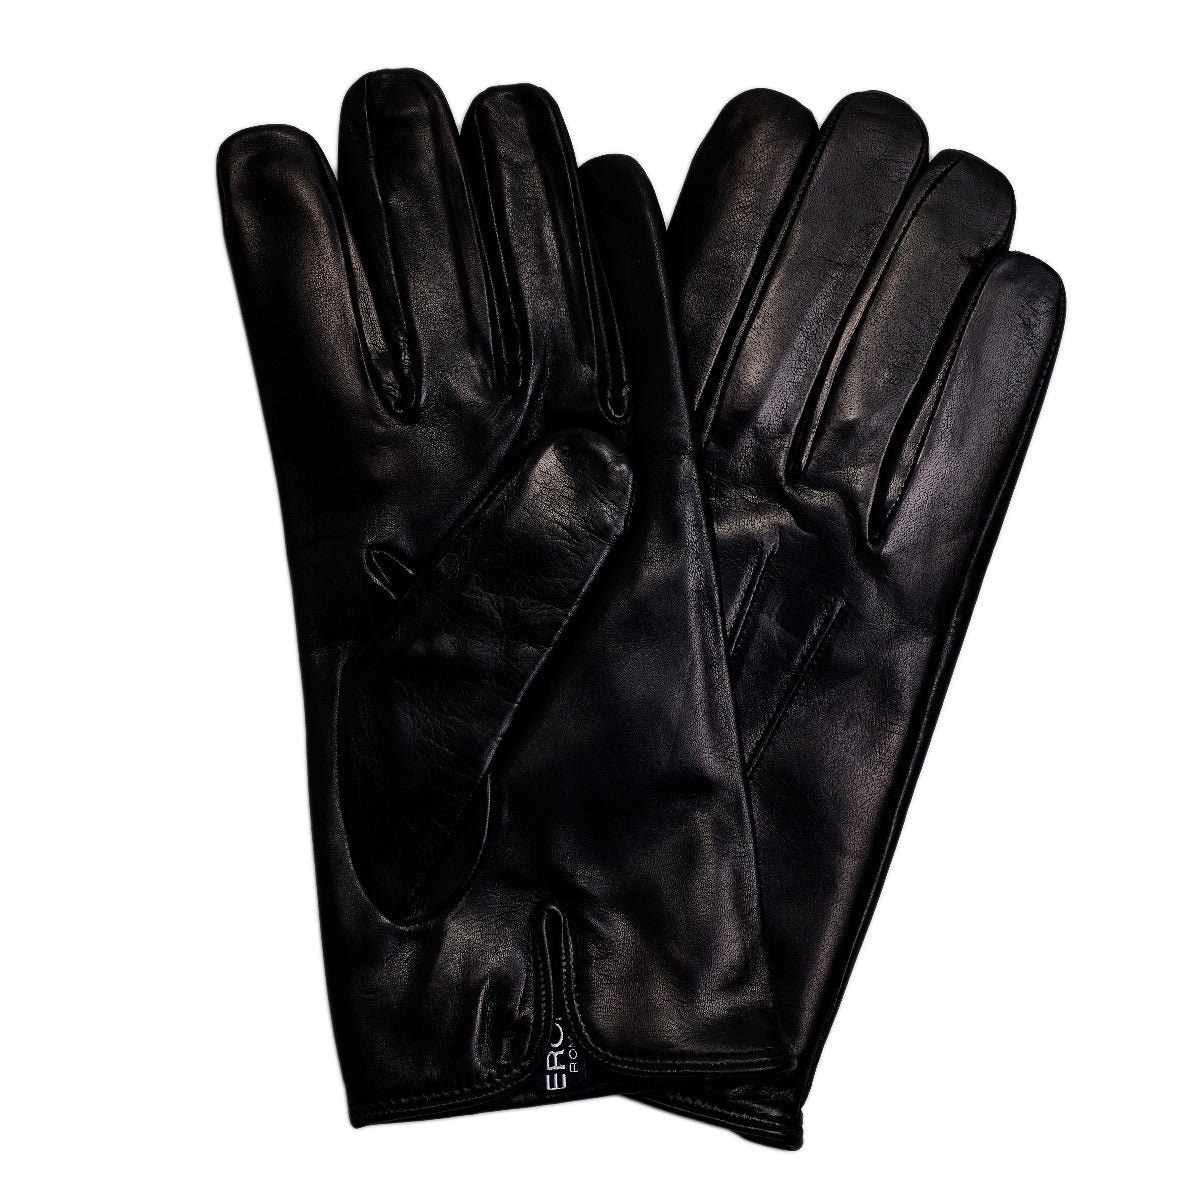 A pair of Sovereign Grade Black Nappa Leather Gloves, Cashmere Lined by KirbyAllison.com on a white background.